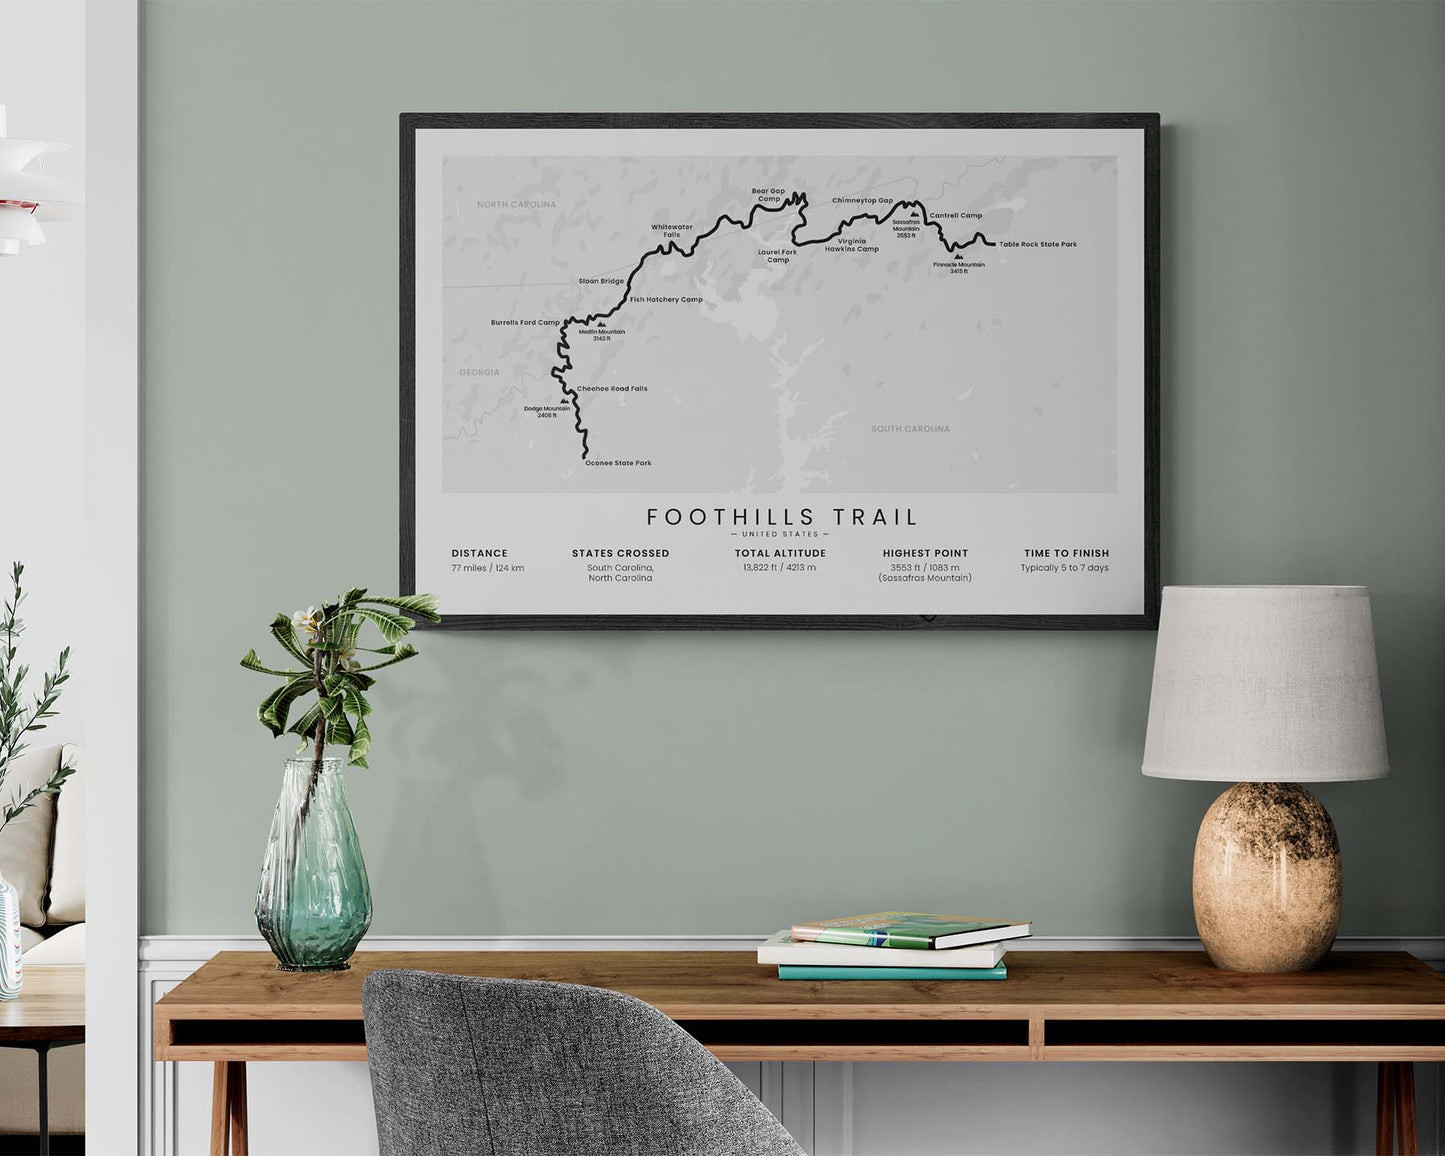 Foothills National Recreation Trail (South Carolina) Track Map Art in Minimal Room Decor